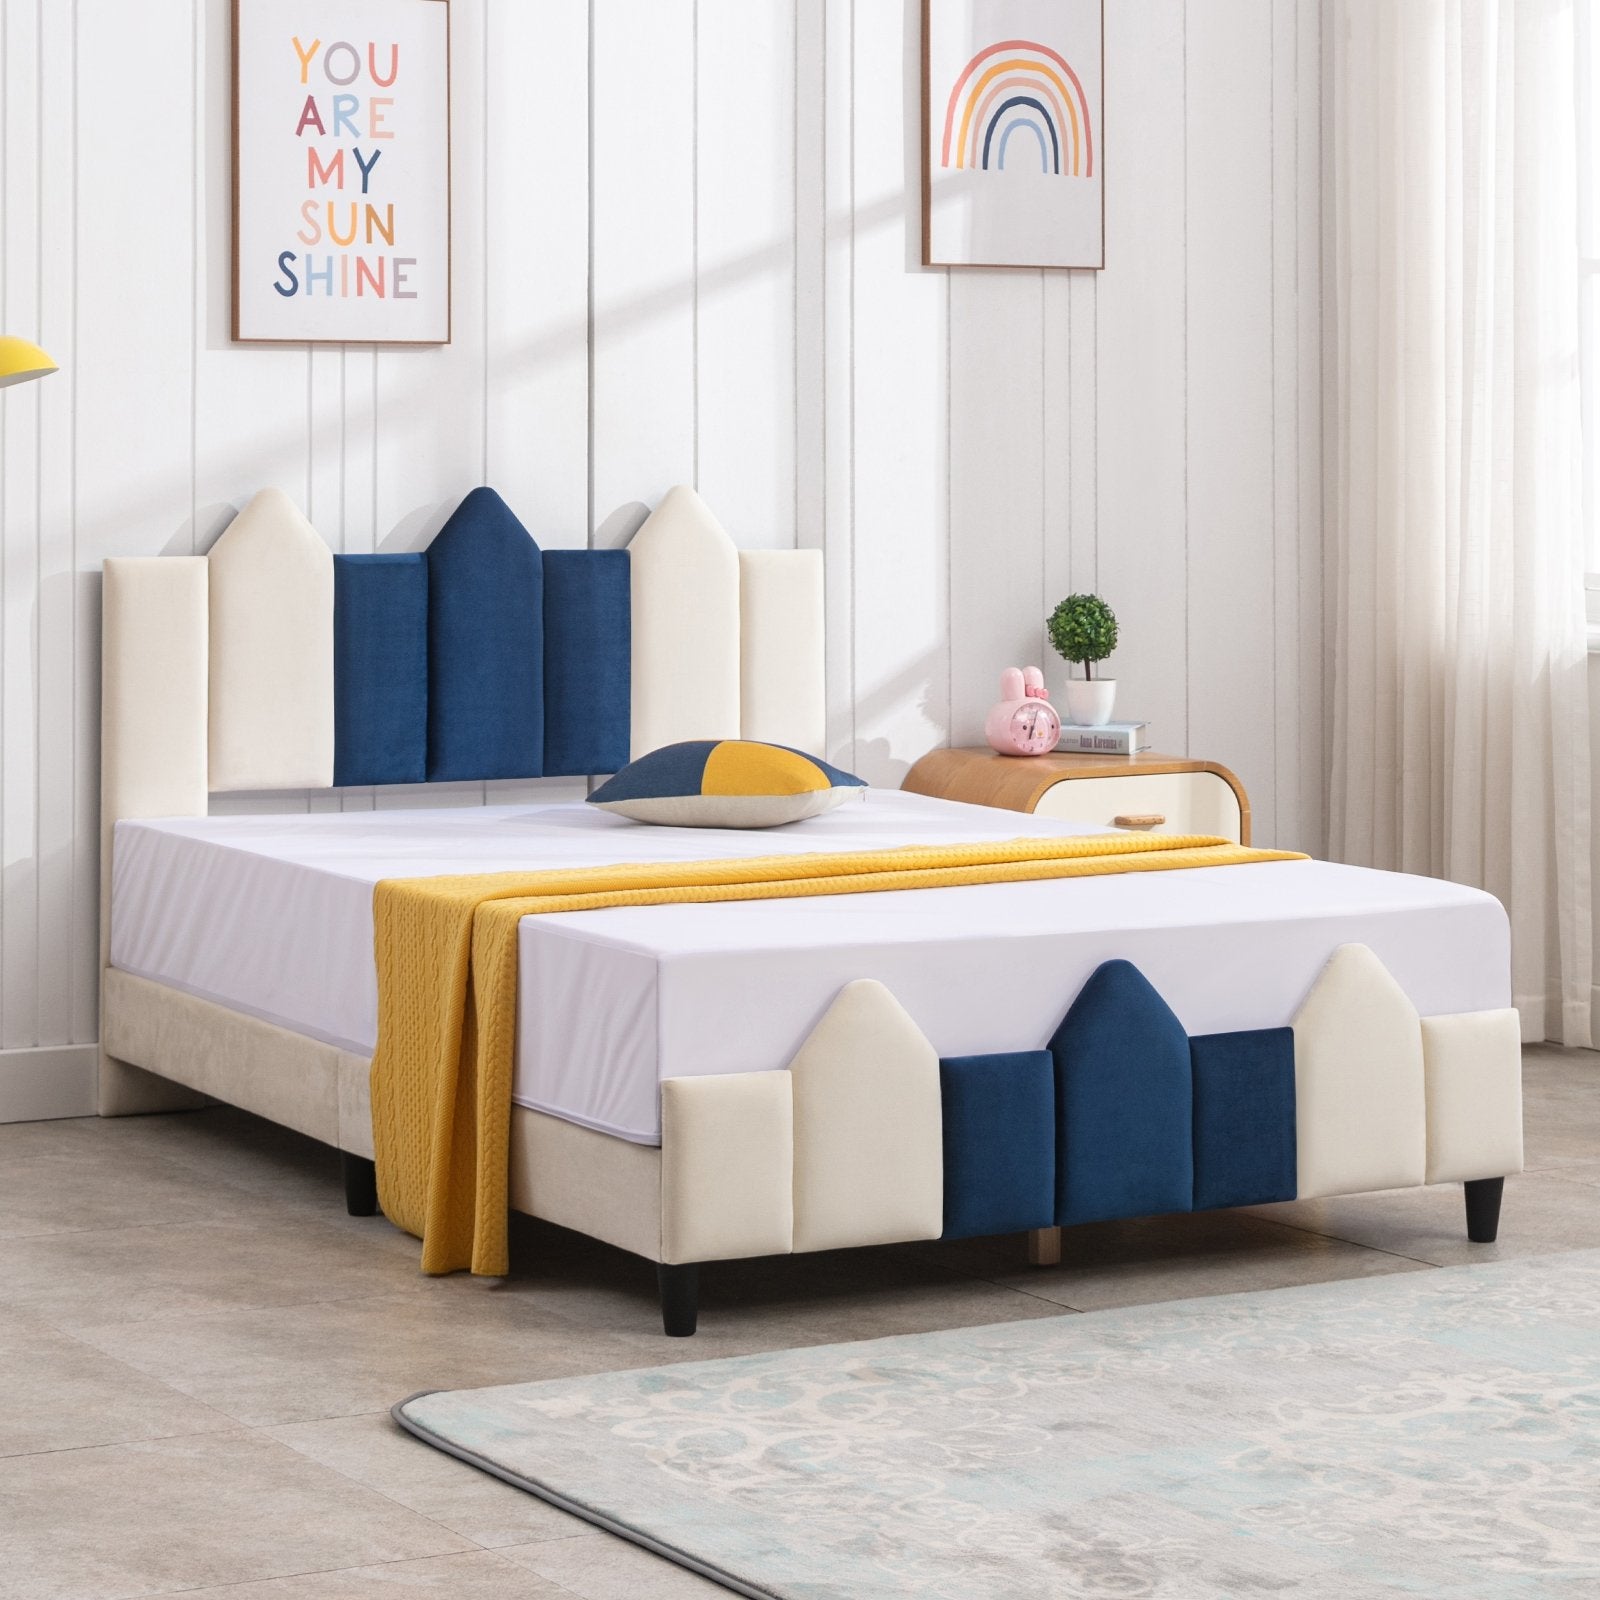 Kid's Bed | Upholstered Kids Bed Frame with Tuft Headboard and Footboard - Mjkonebed frame